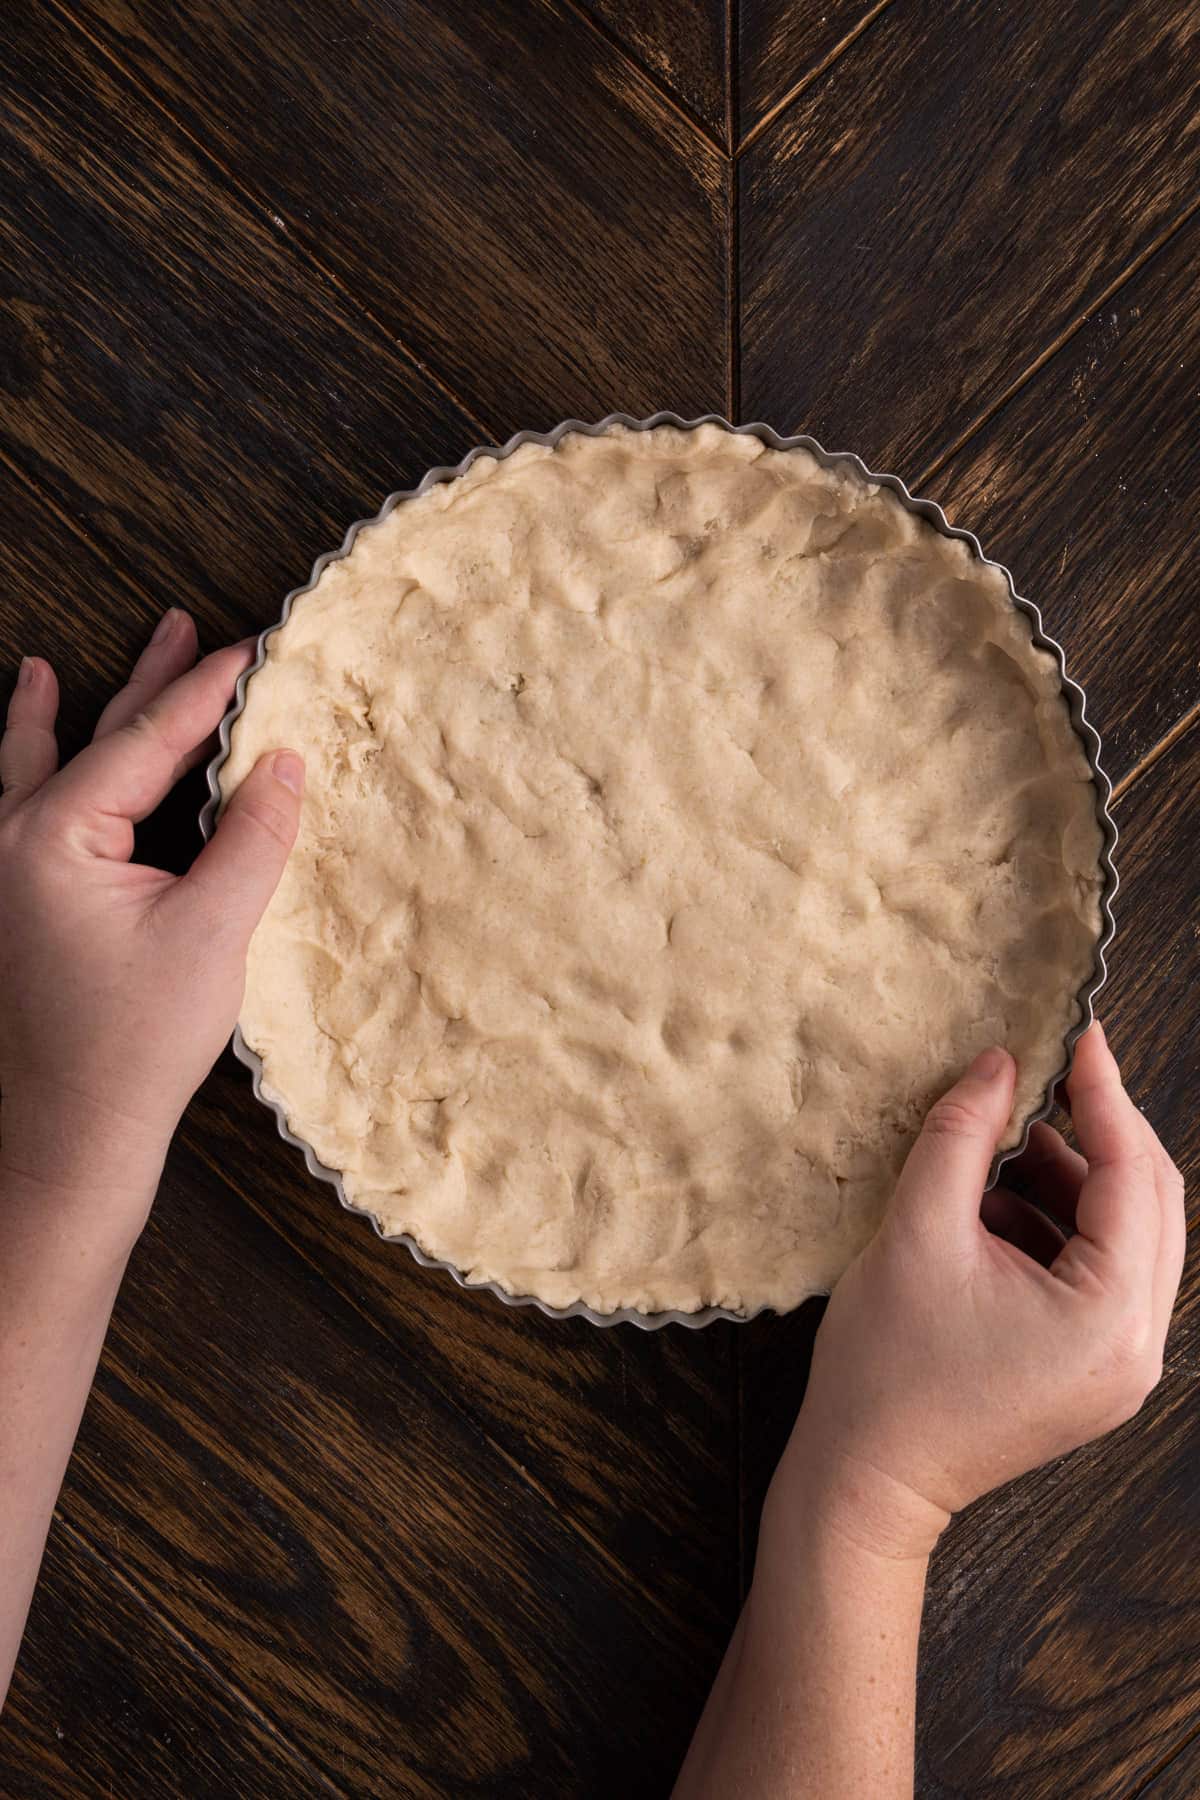 Using clean hands to push quiche crust dough into dish